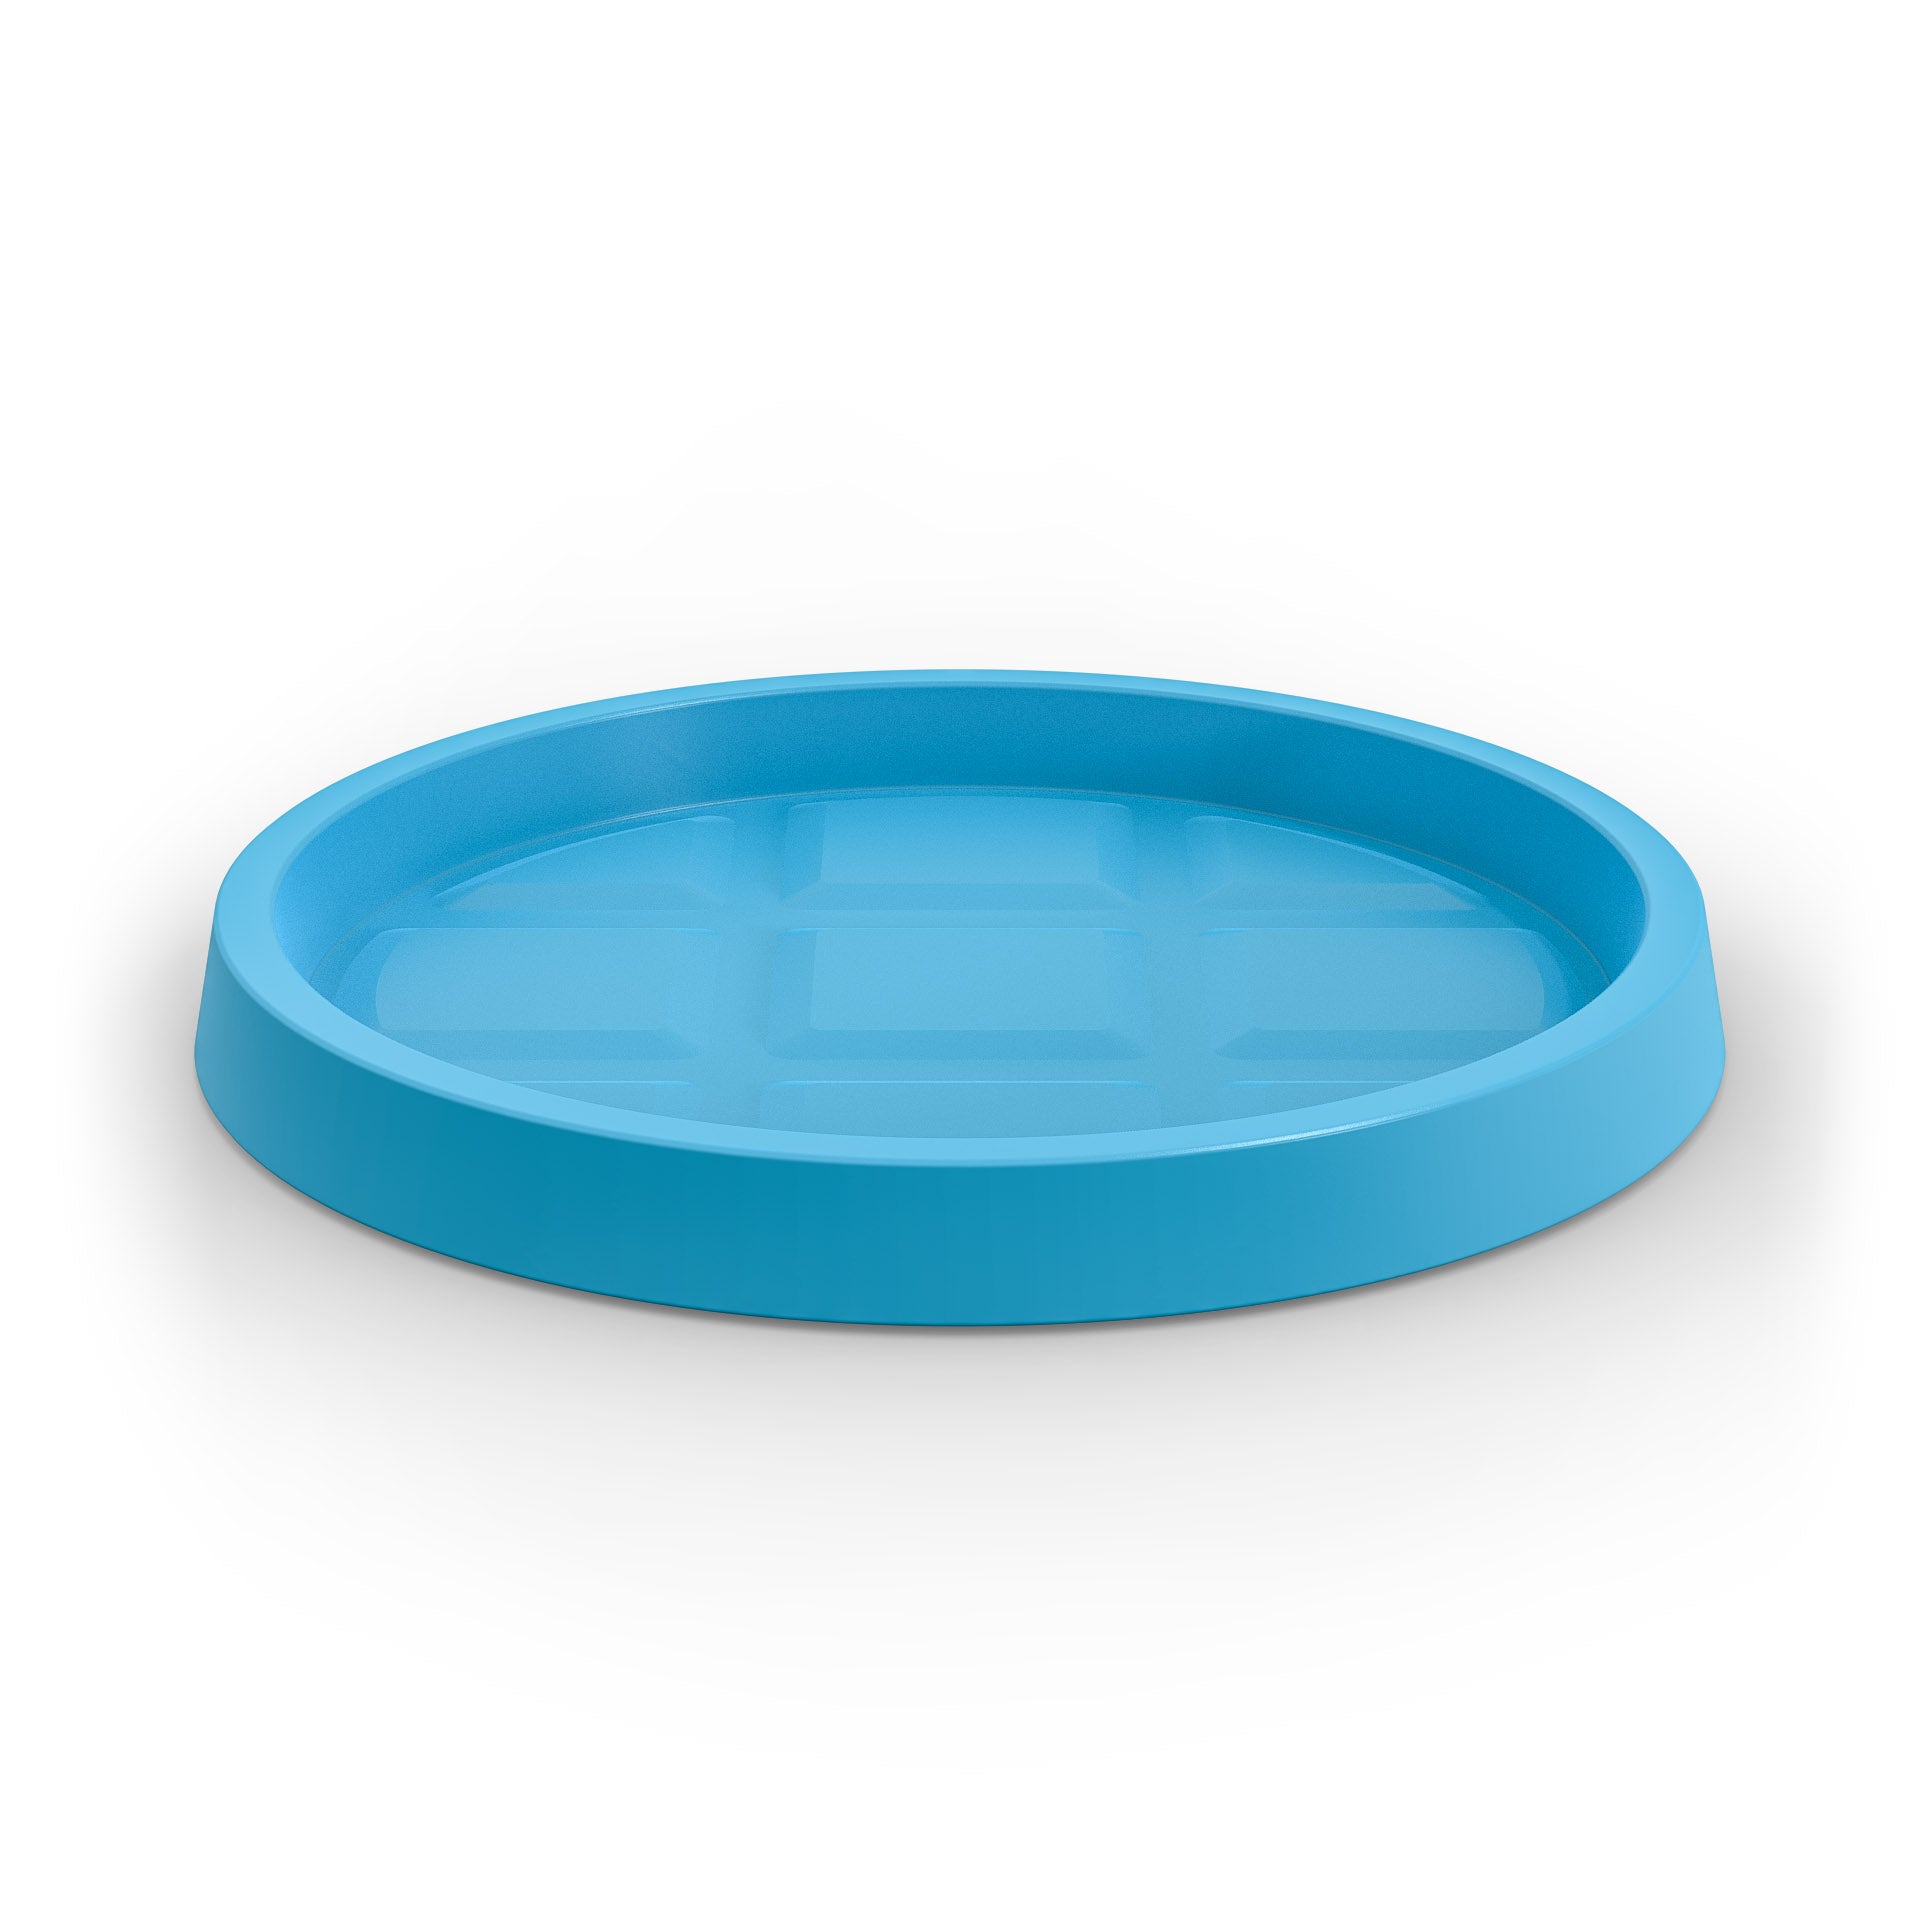 A large saucer for Modscene planters pots in a blue colour. NZ made.